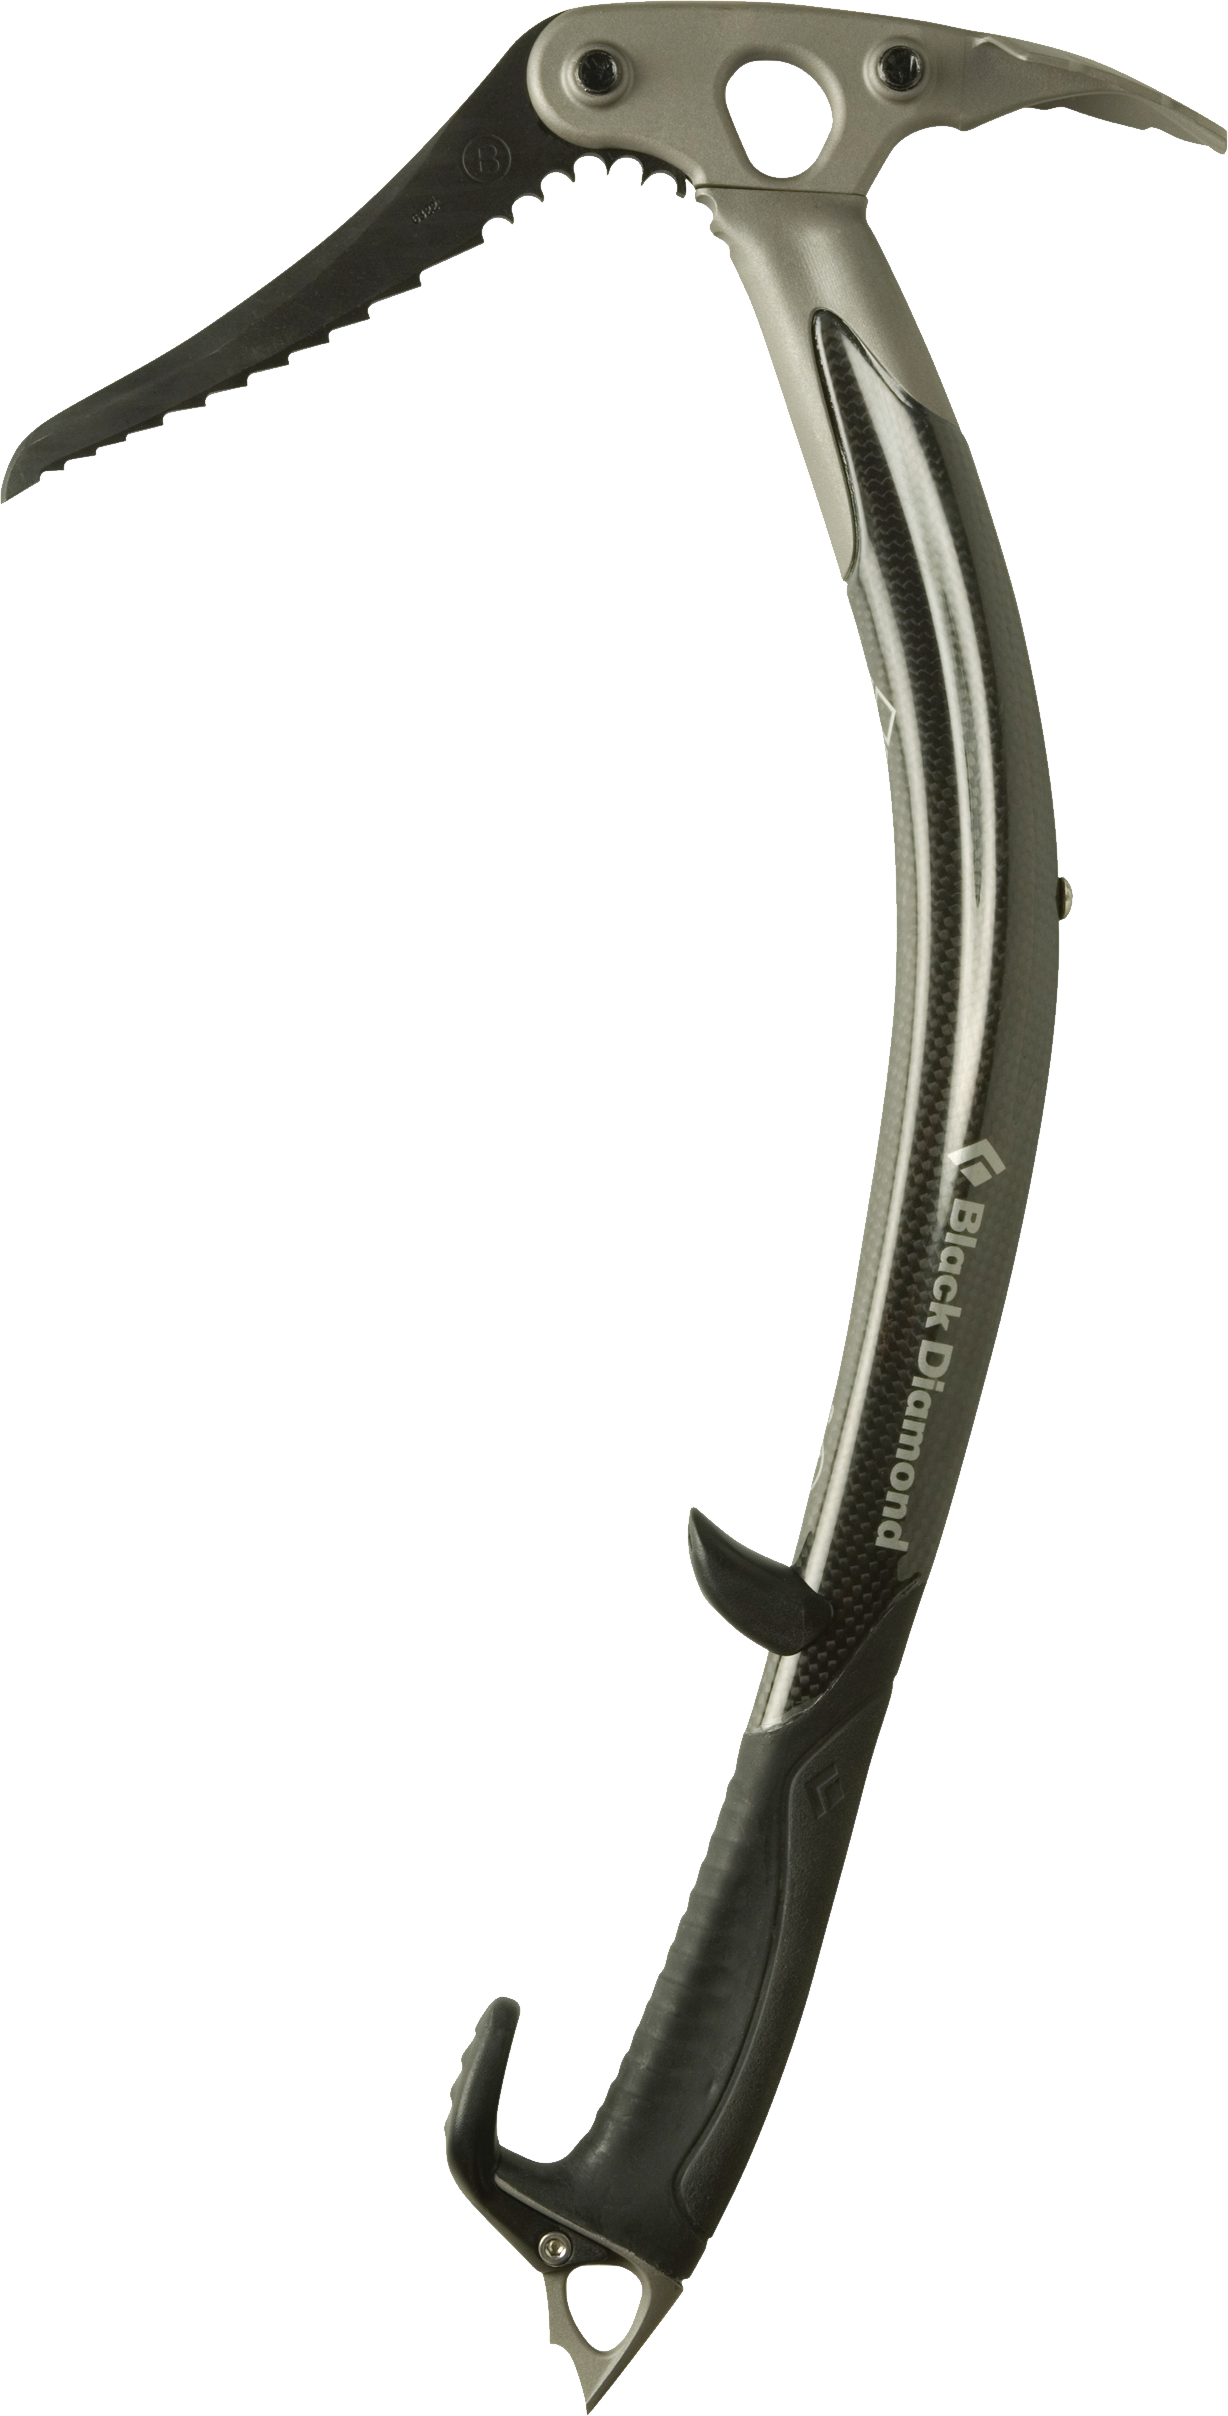 Ice Axe Transparent Image